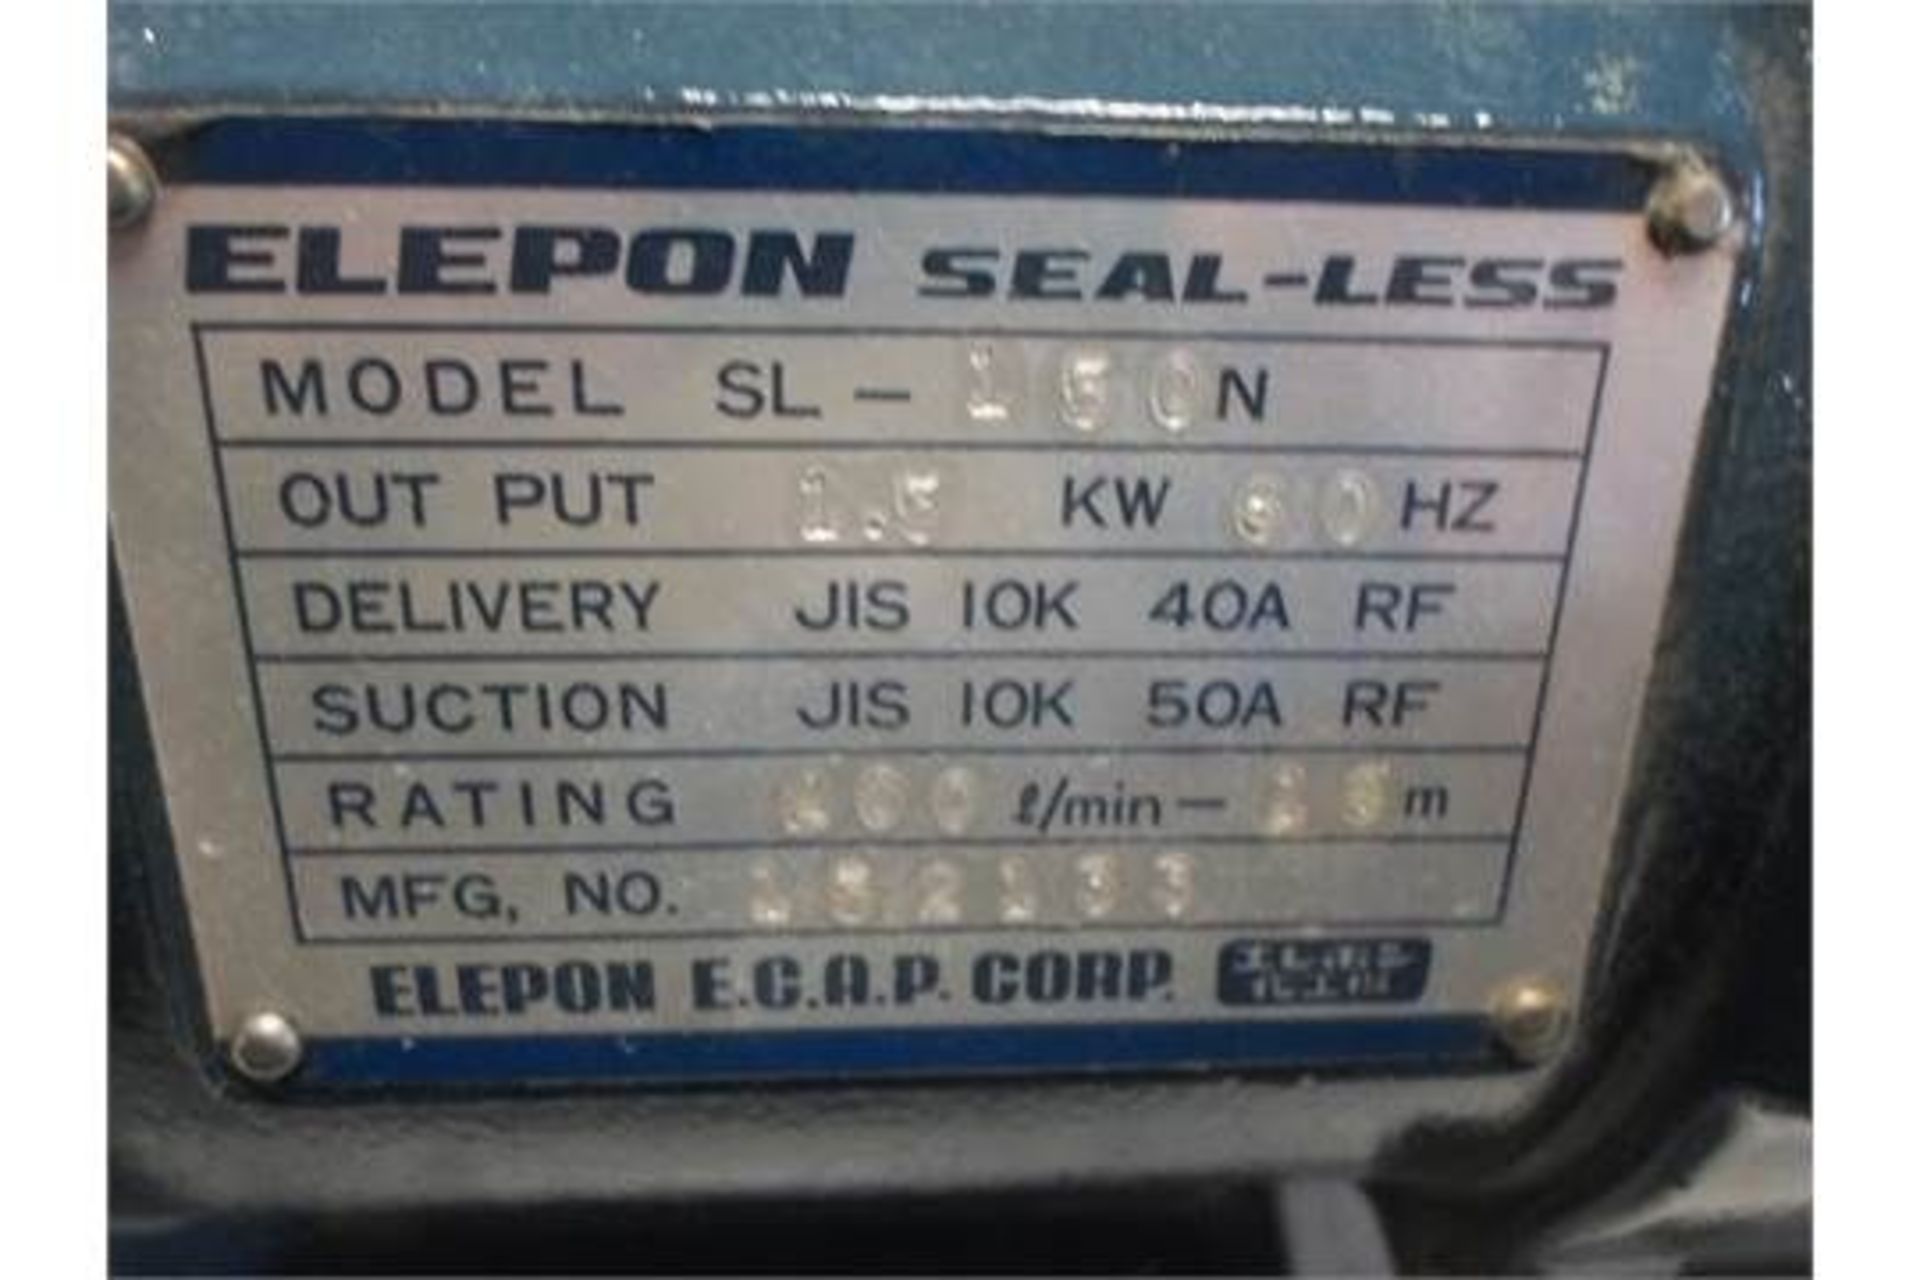 LOT OF TWO ELEPON SEAL-LESS SL-150N 2HP PUMPS - Image 2 of 2